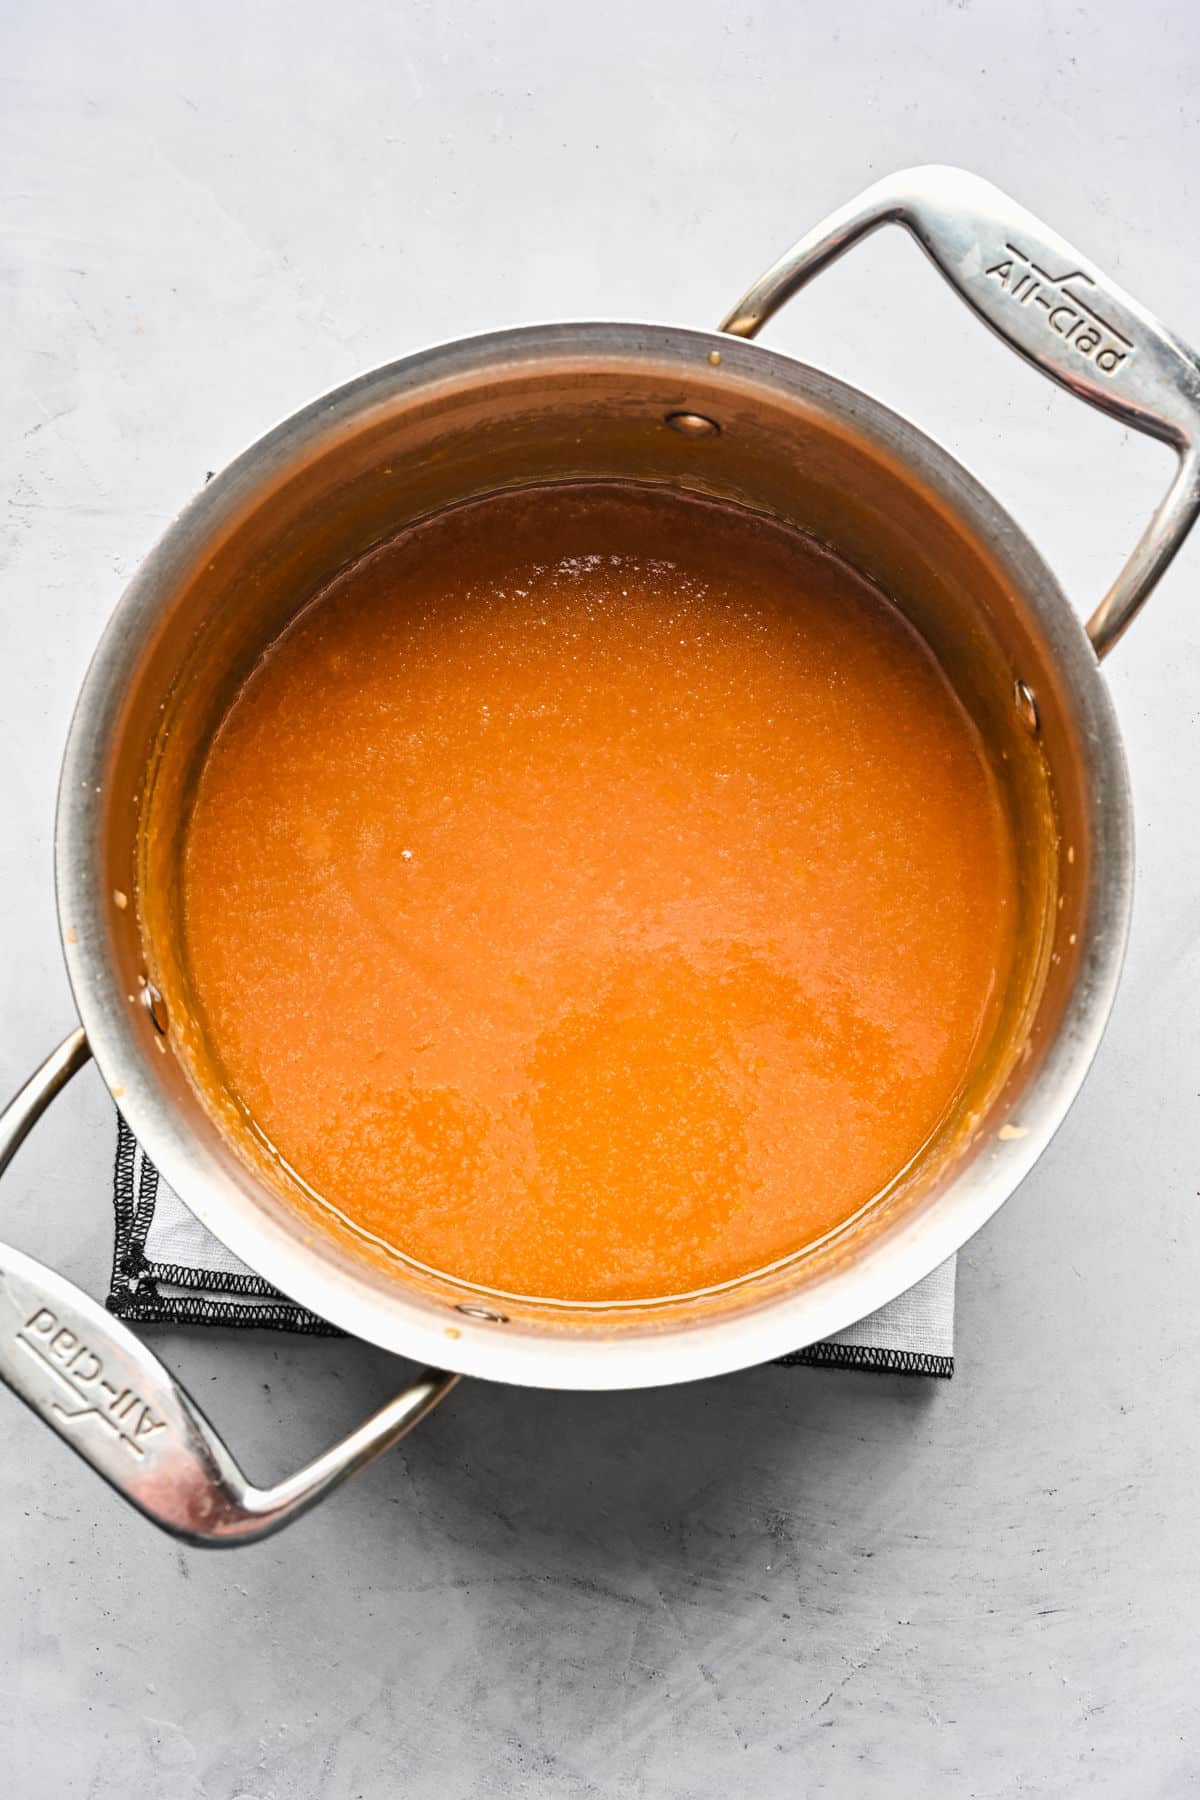 Brown sugar and egg yolks whisked together in a pot.